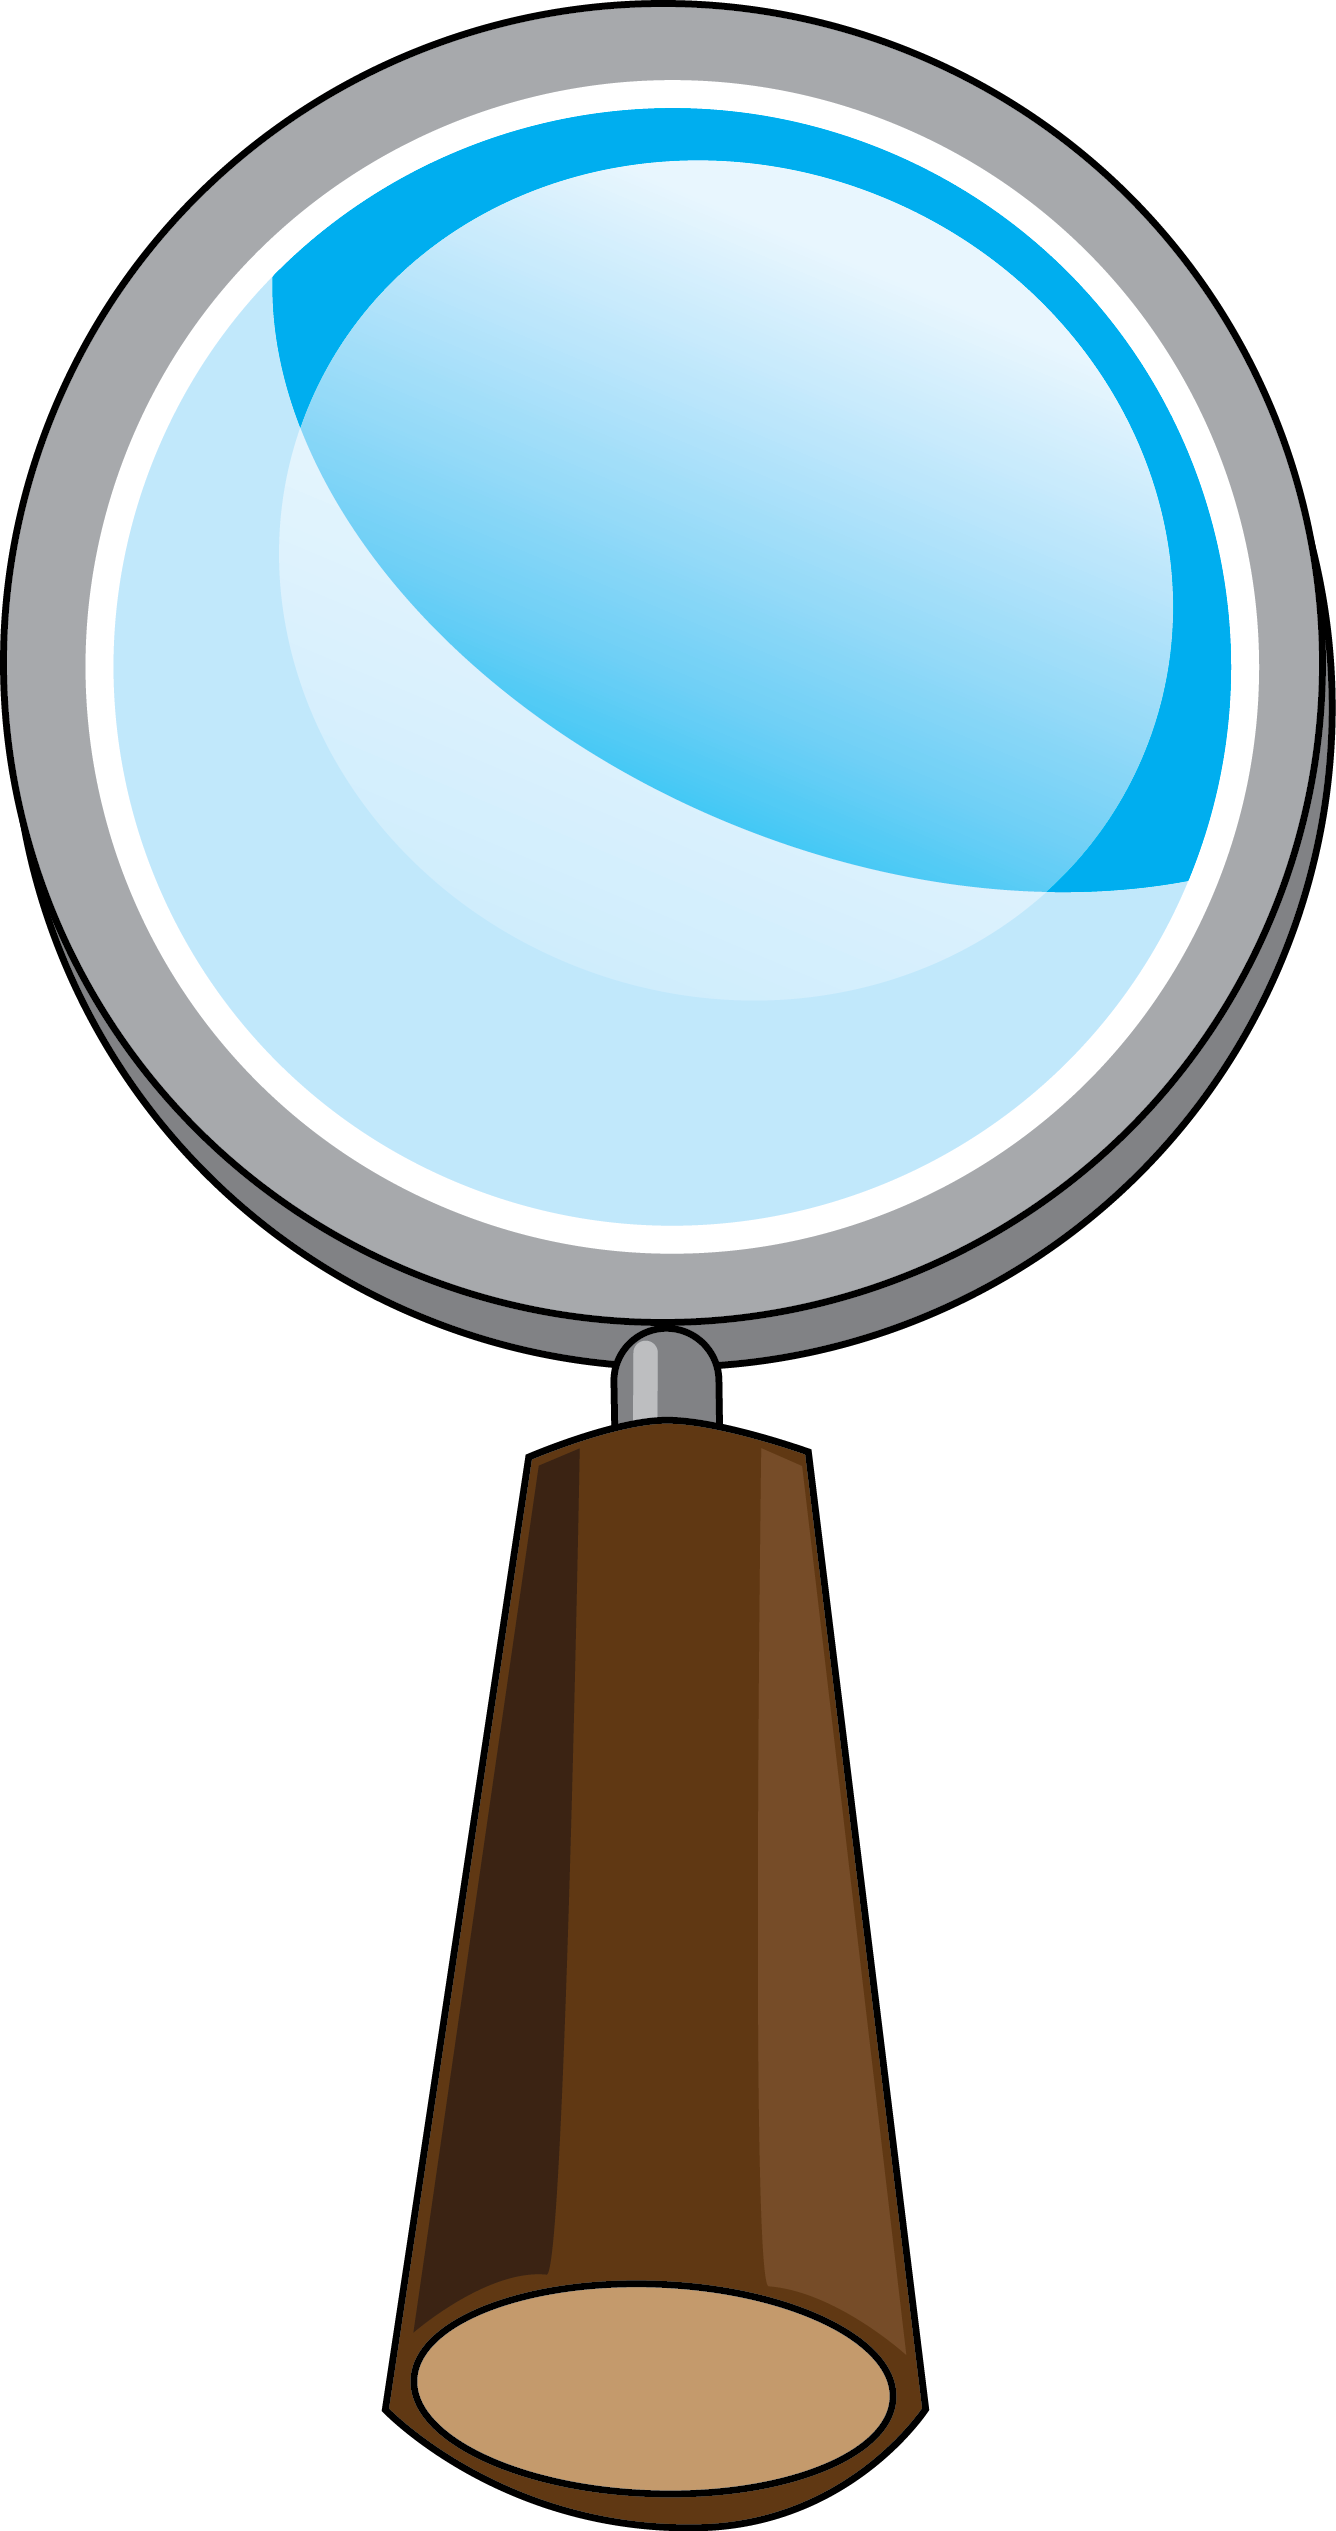 free clipart images magnifying glass - photo #39